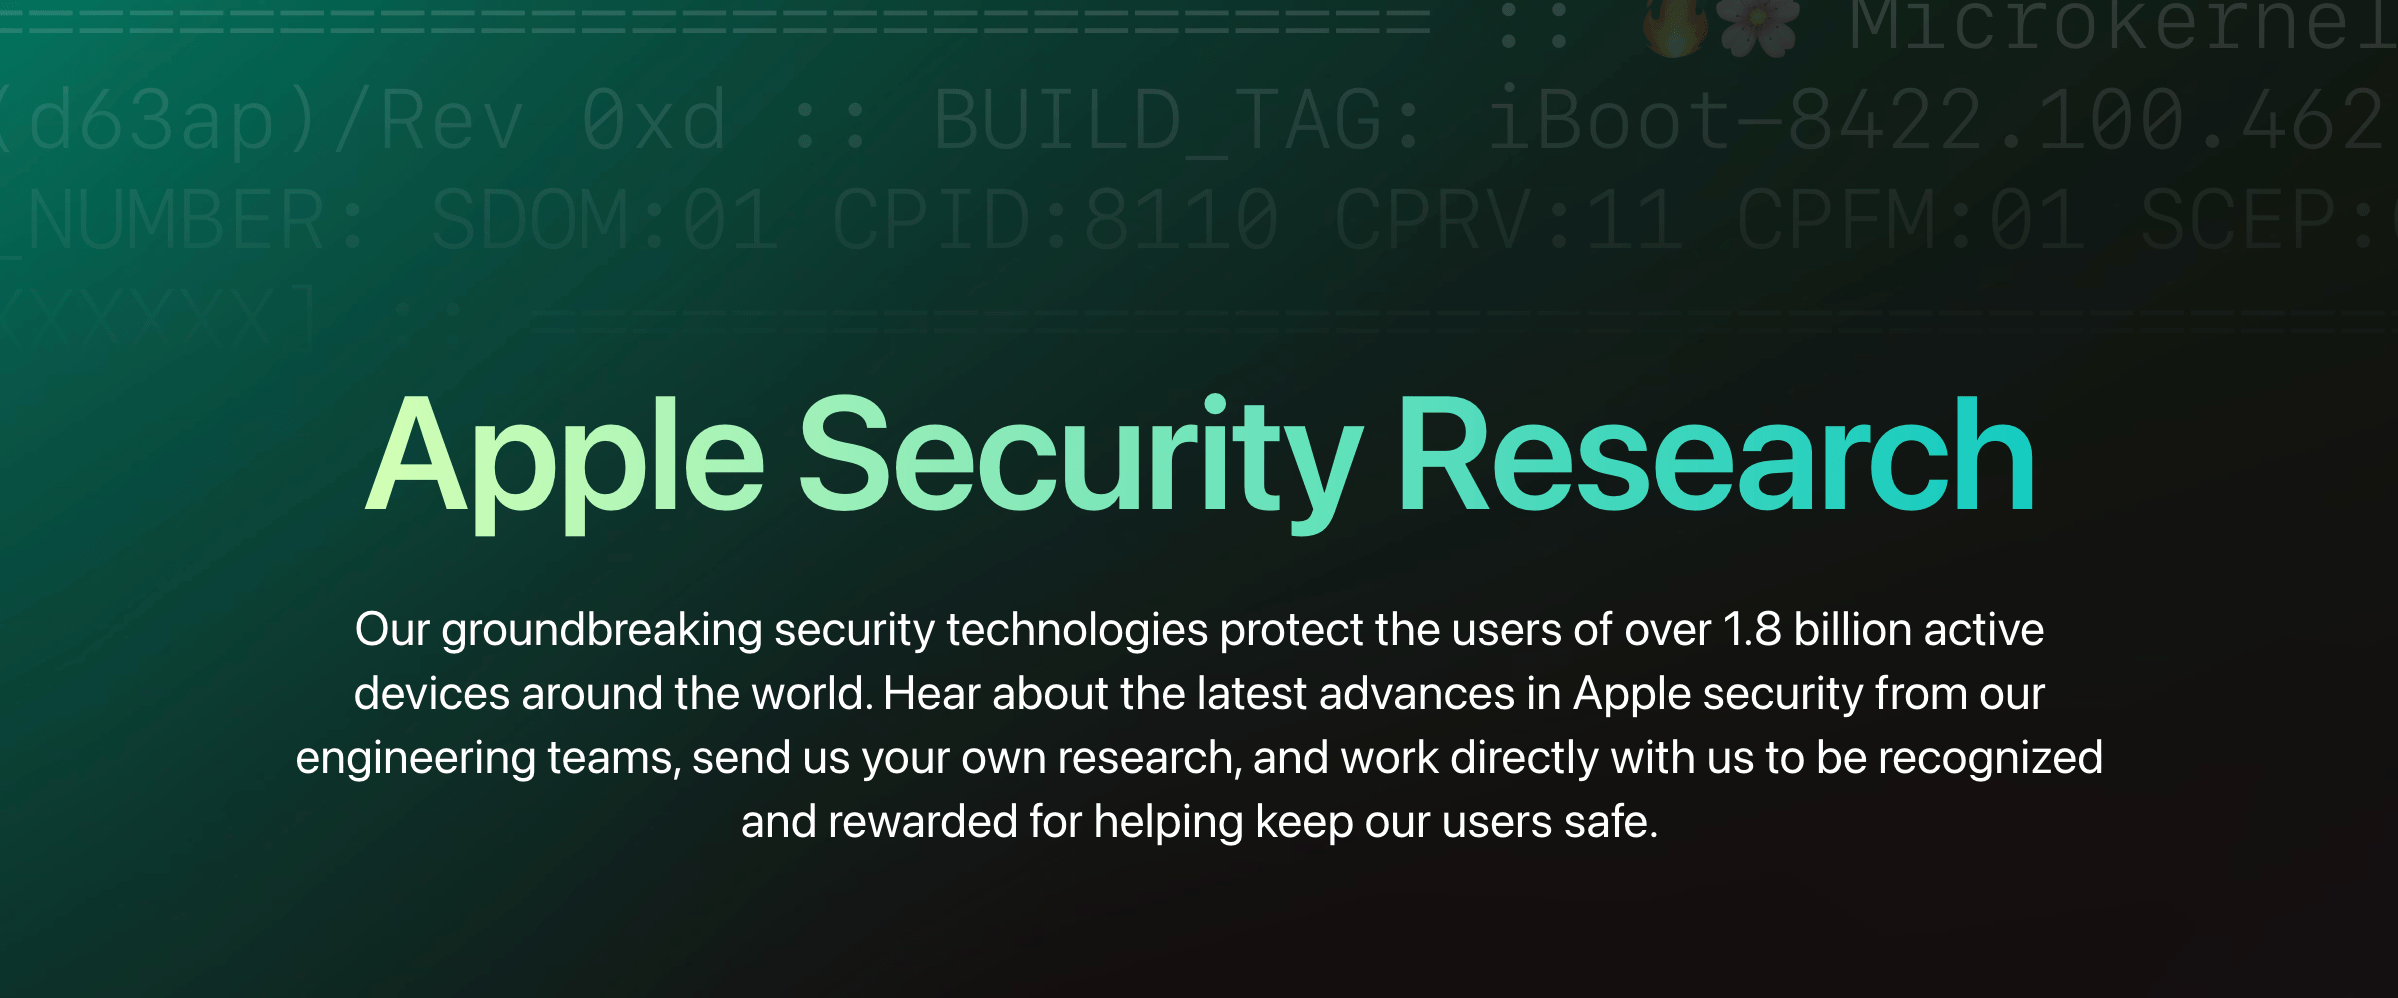 Apple Security Research website for 2022.